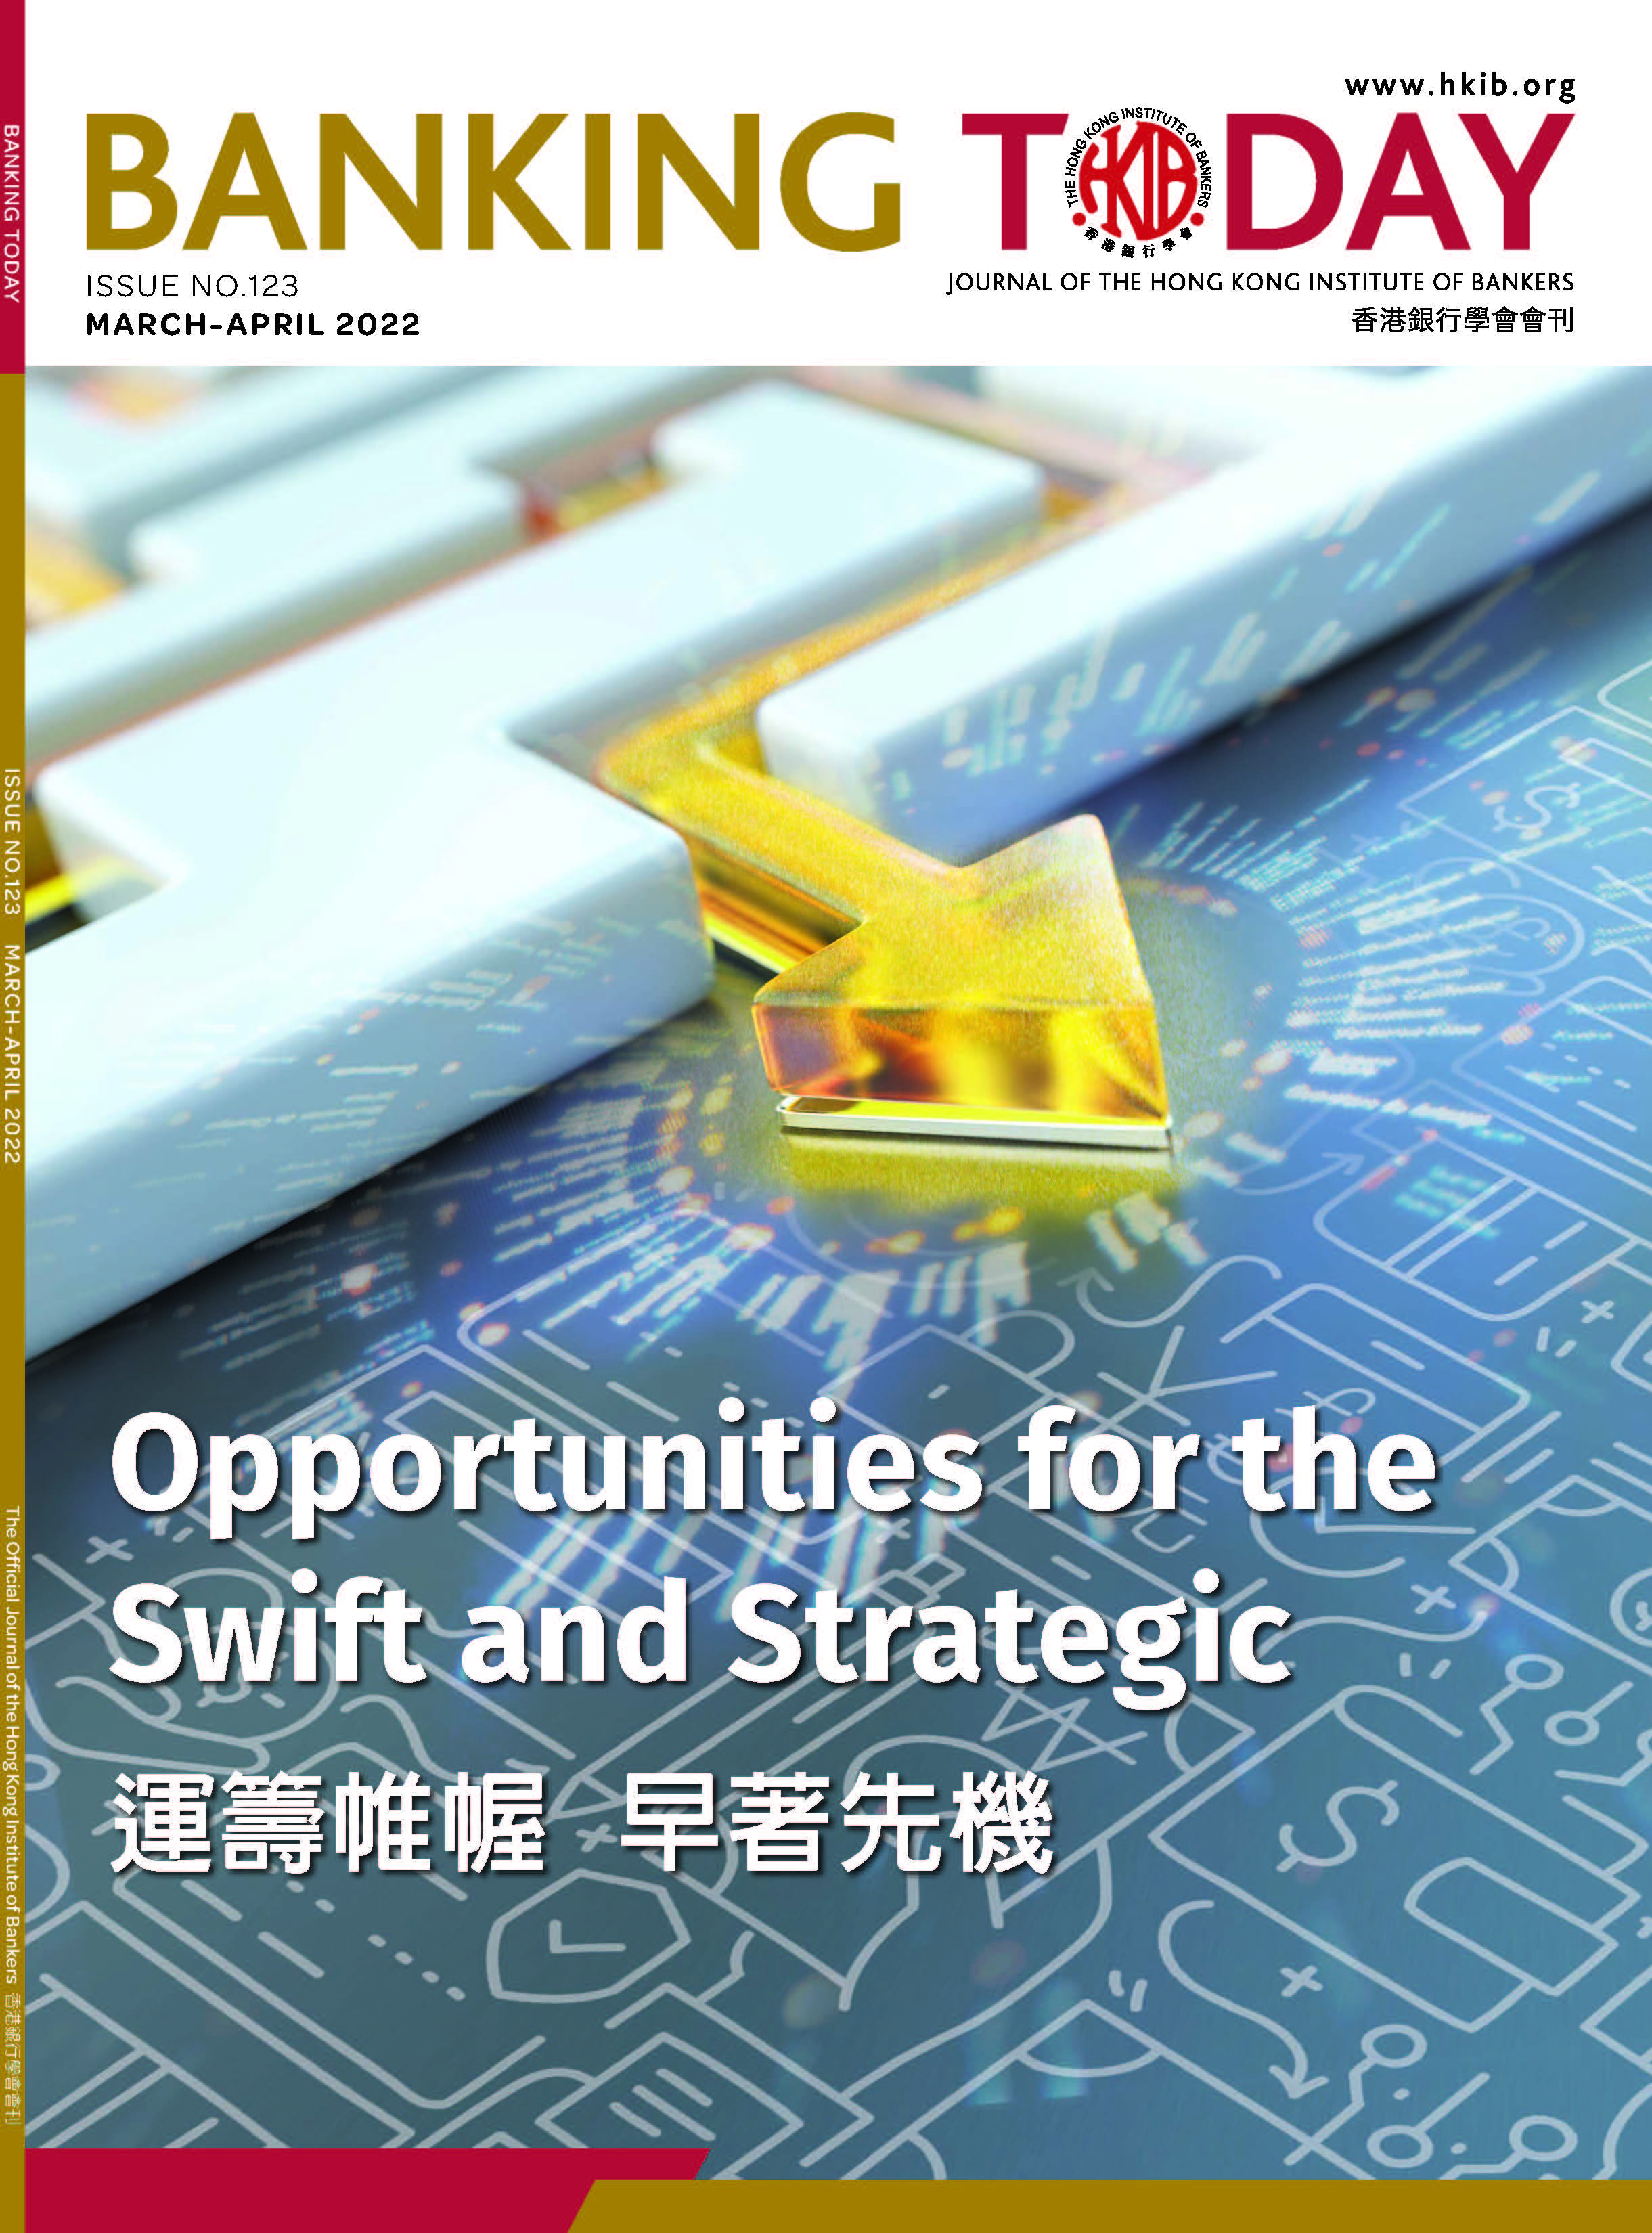 Opportunities for the Swift and Strategic